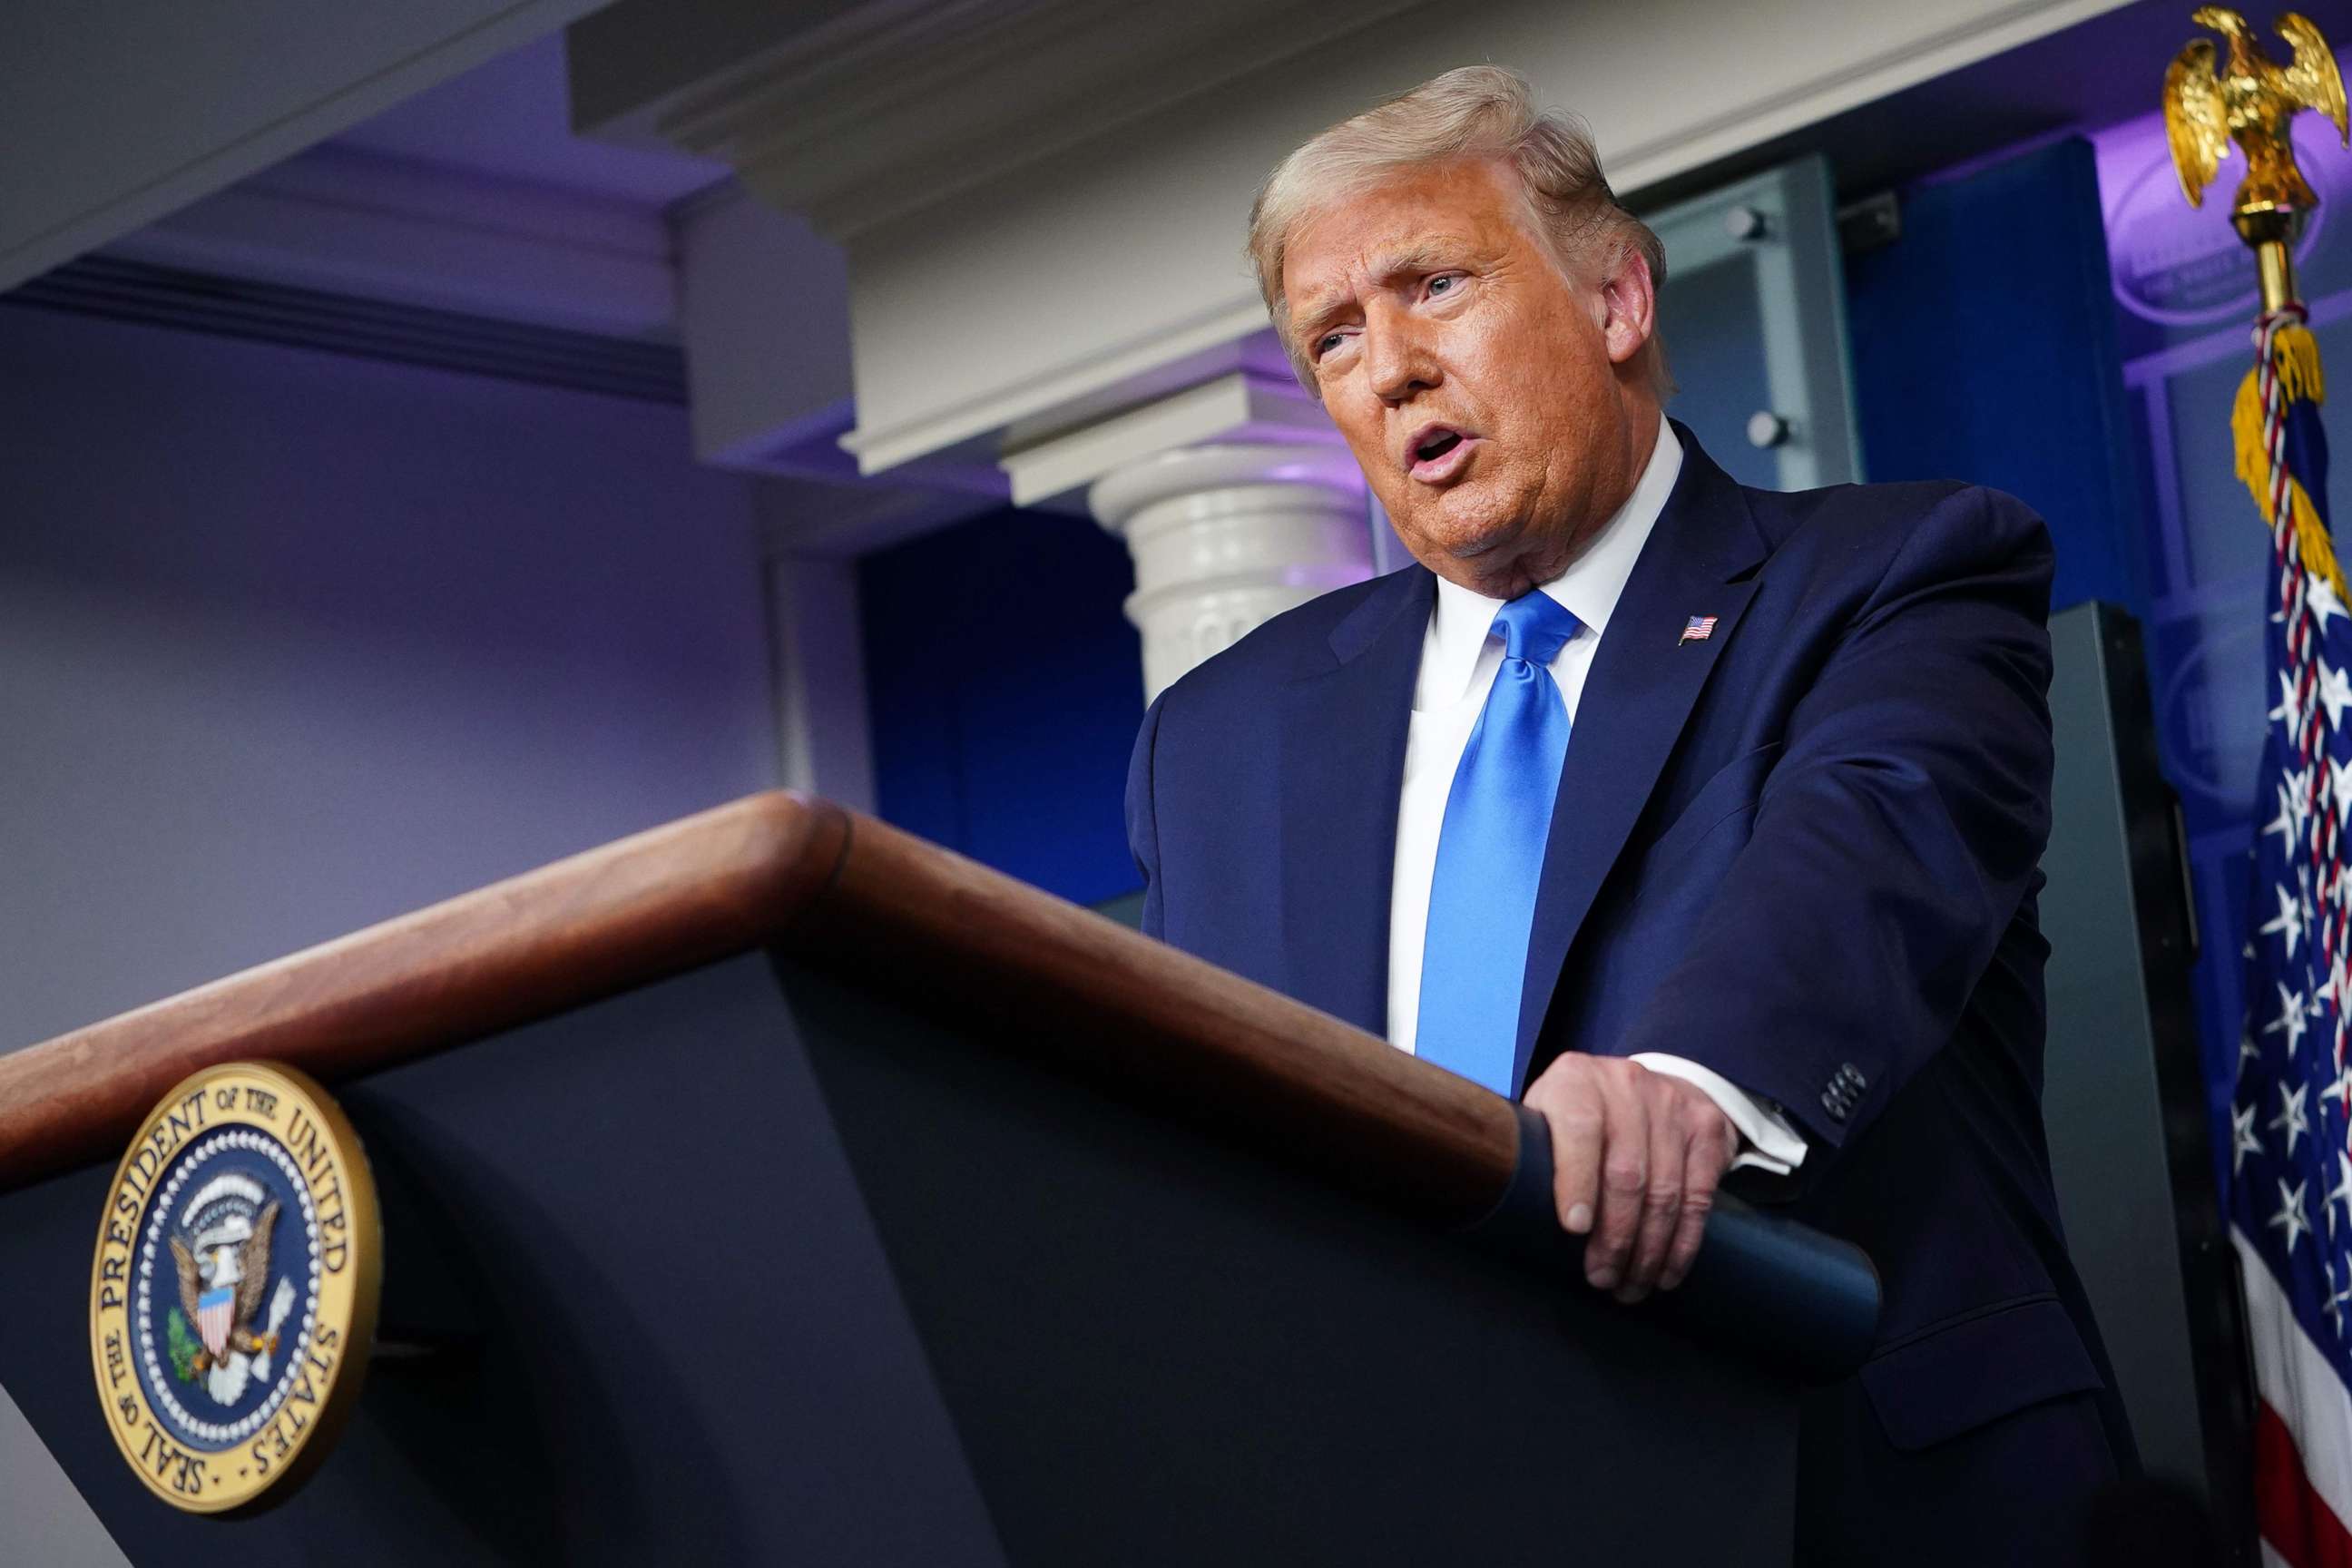 PHOTO: President Donald Trump speaks during a press conference in the Brady Briefing Room of the White House on Sept. 23, 2020, in Washington, DC.